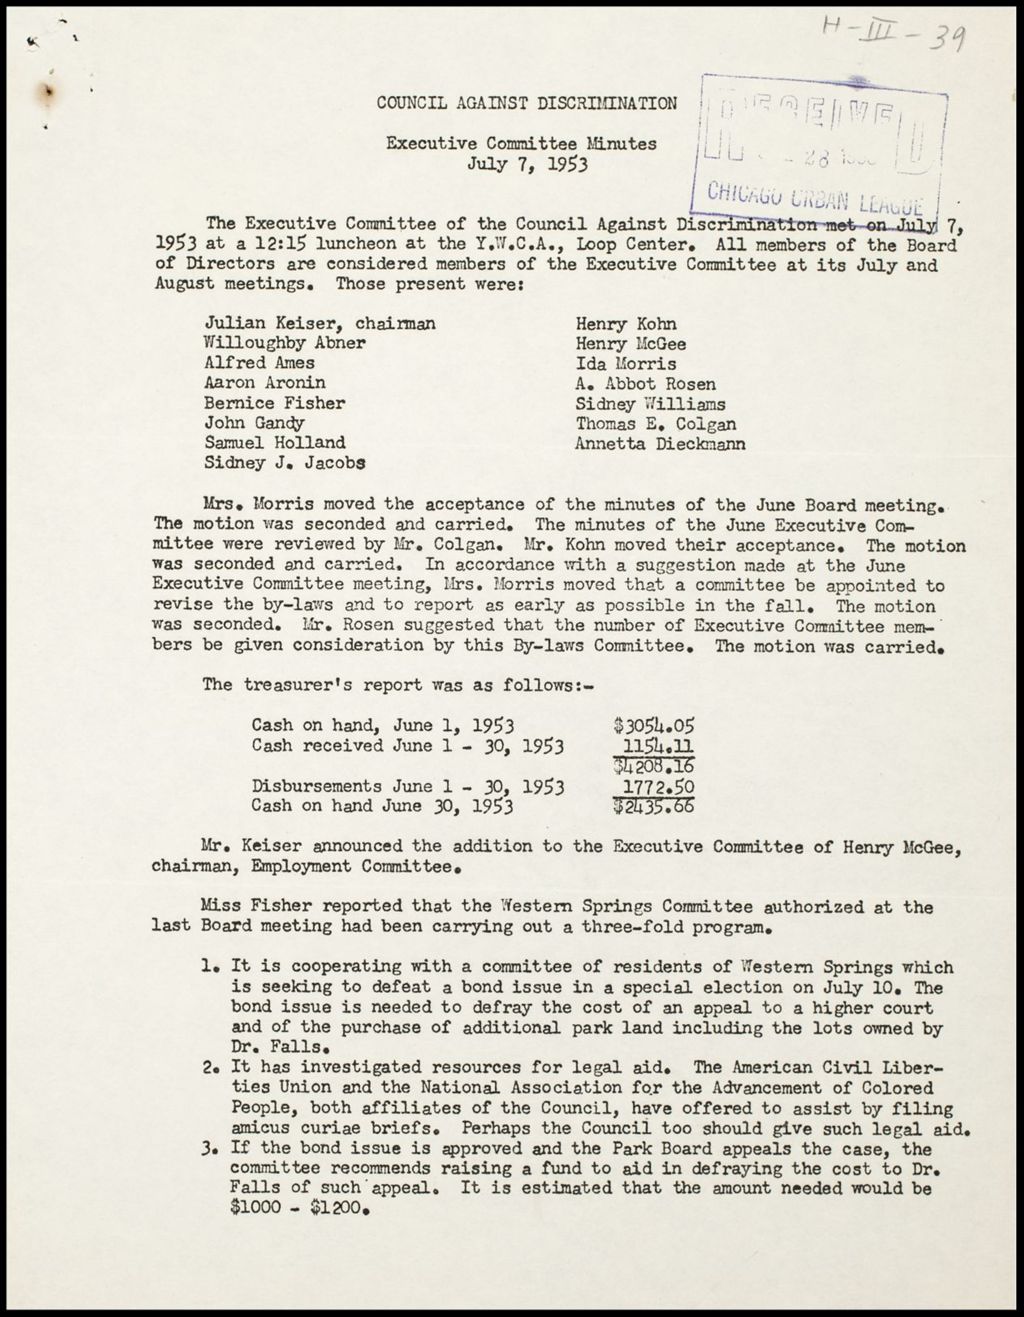 Miniature of Human Relations Department - Chicago Council Against Racial and Religious Discrimination, 1957 (Folder I-2634)